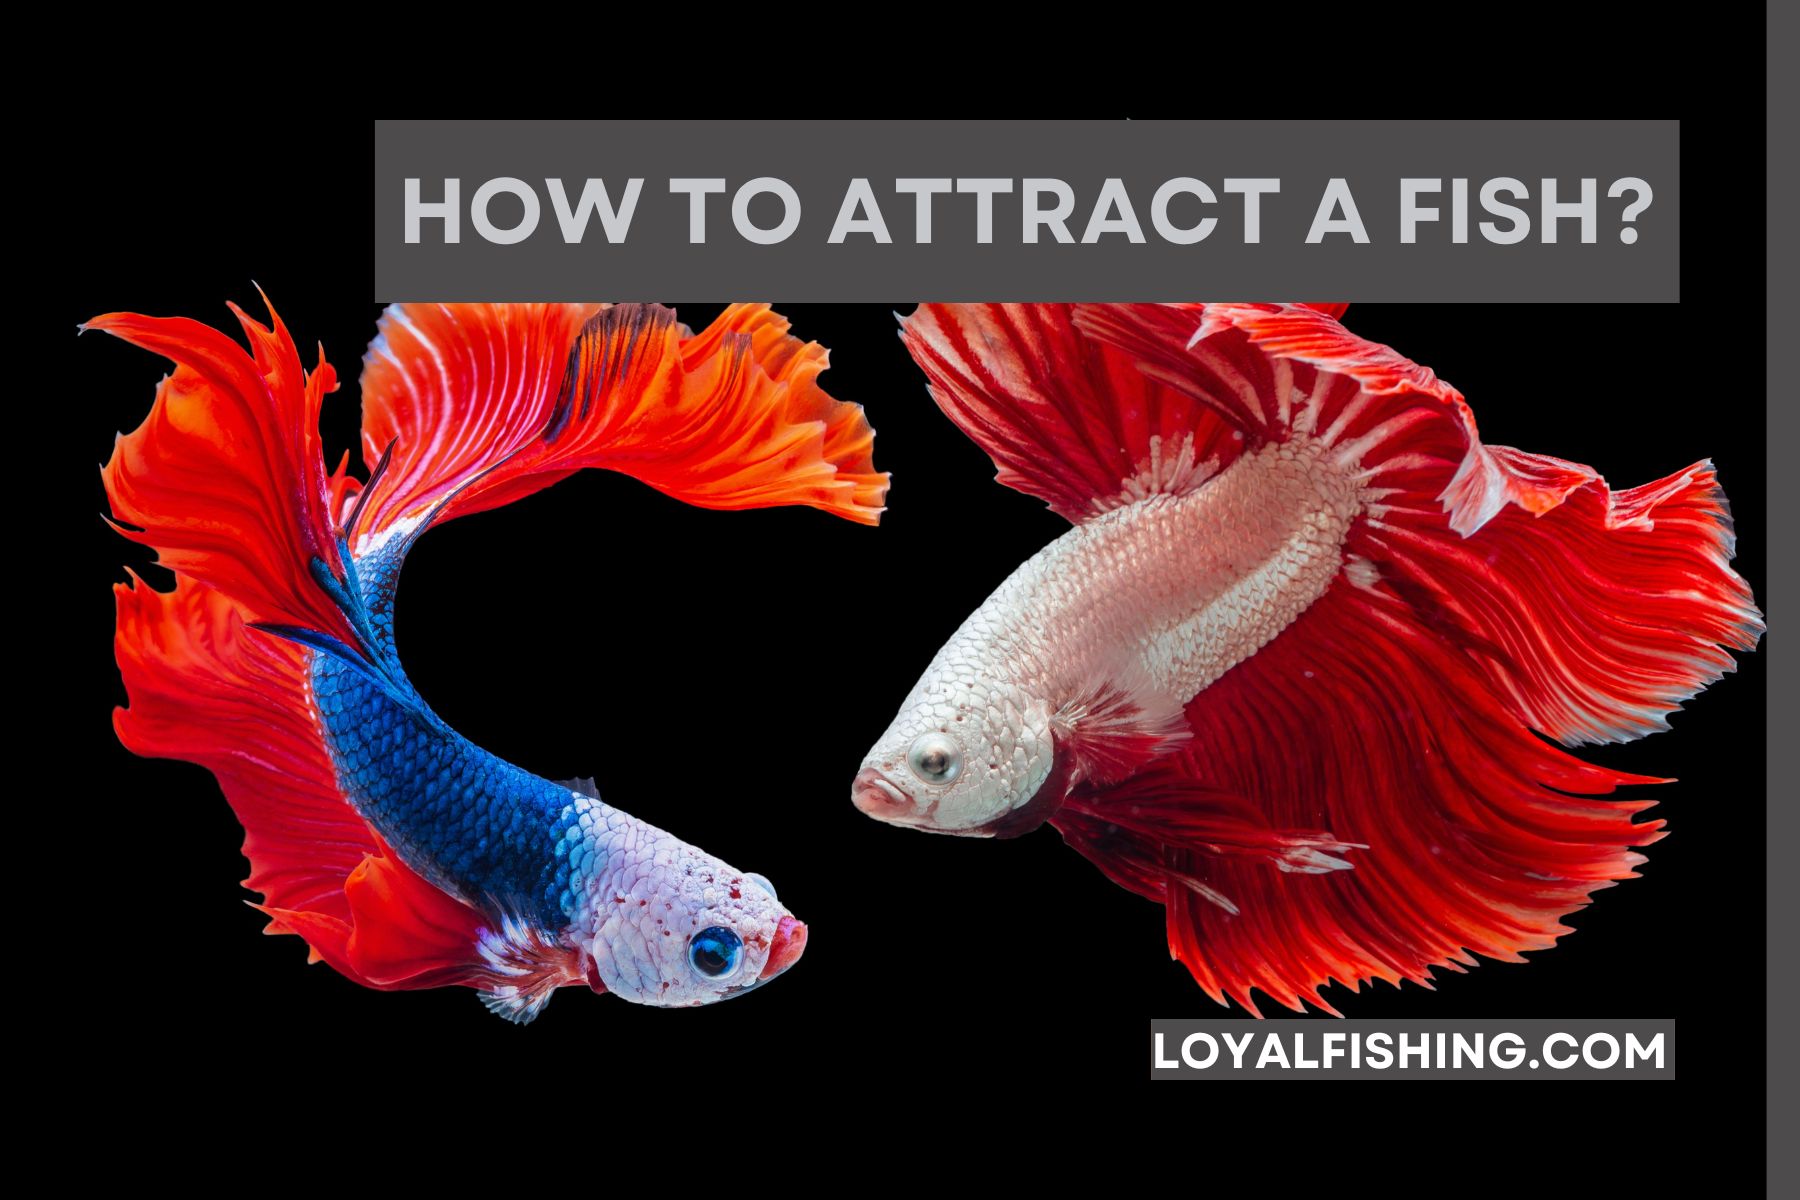 How to Attract a Fish